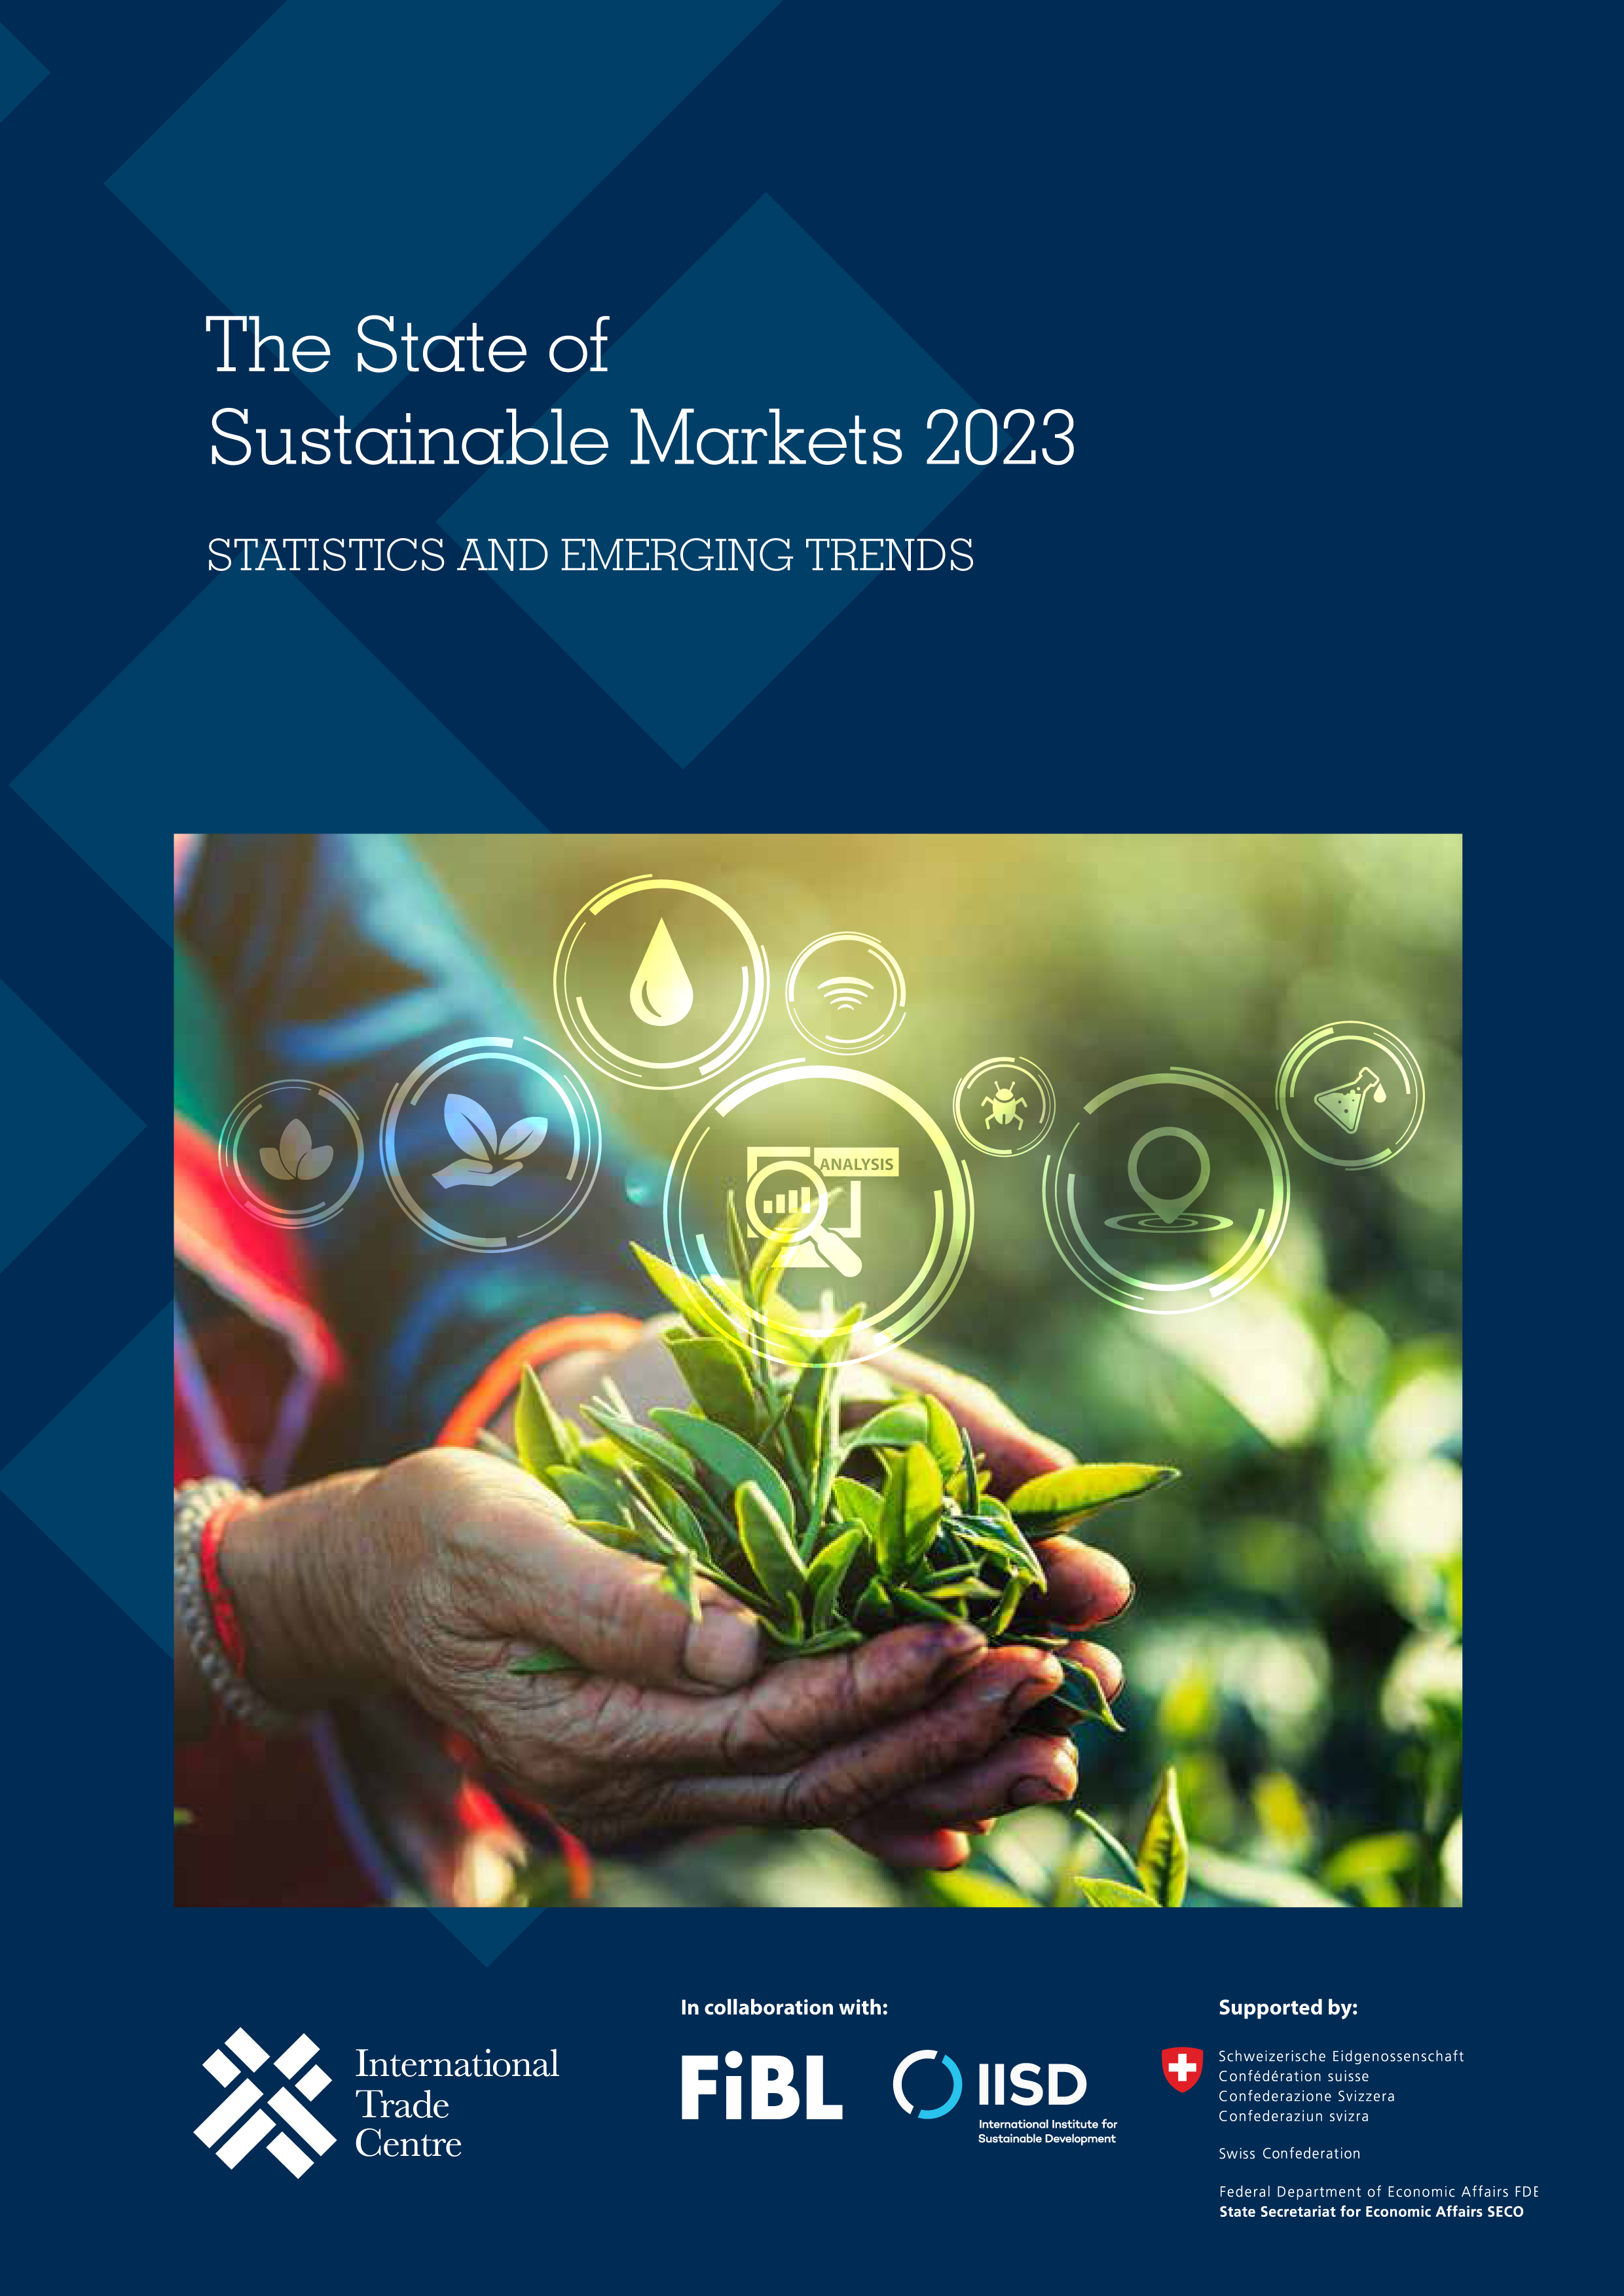 image of The State of Sustainable Markets 2023